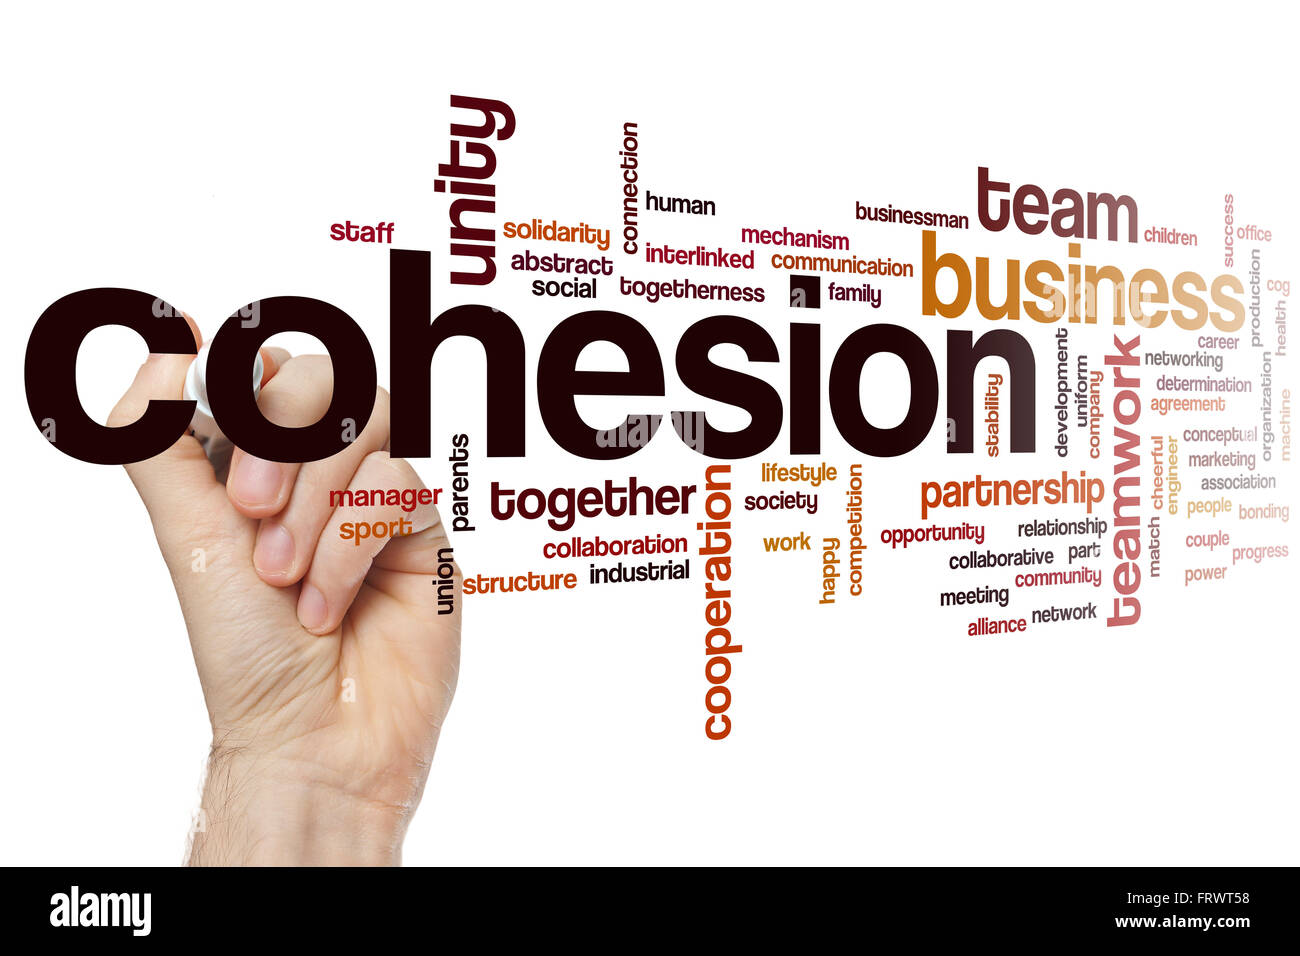 Cohesion concept word cloud background Stock Photo